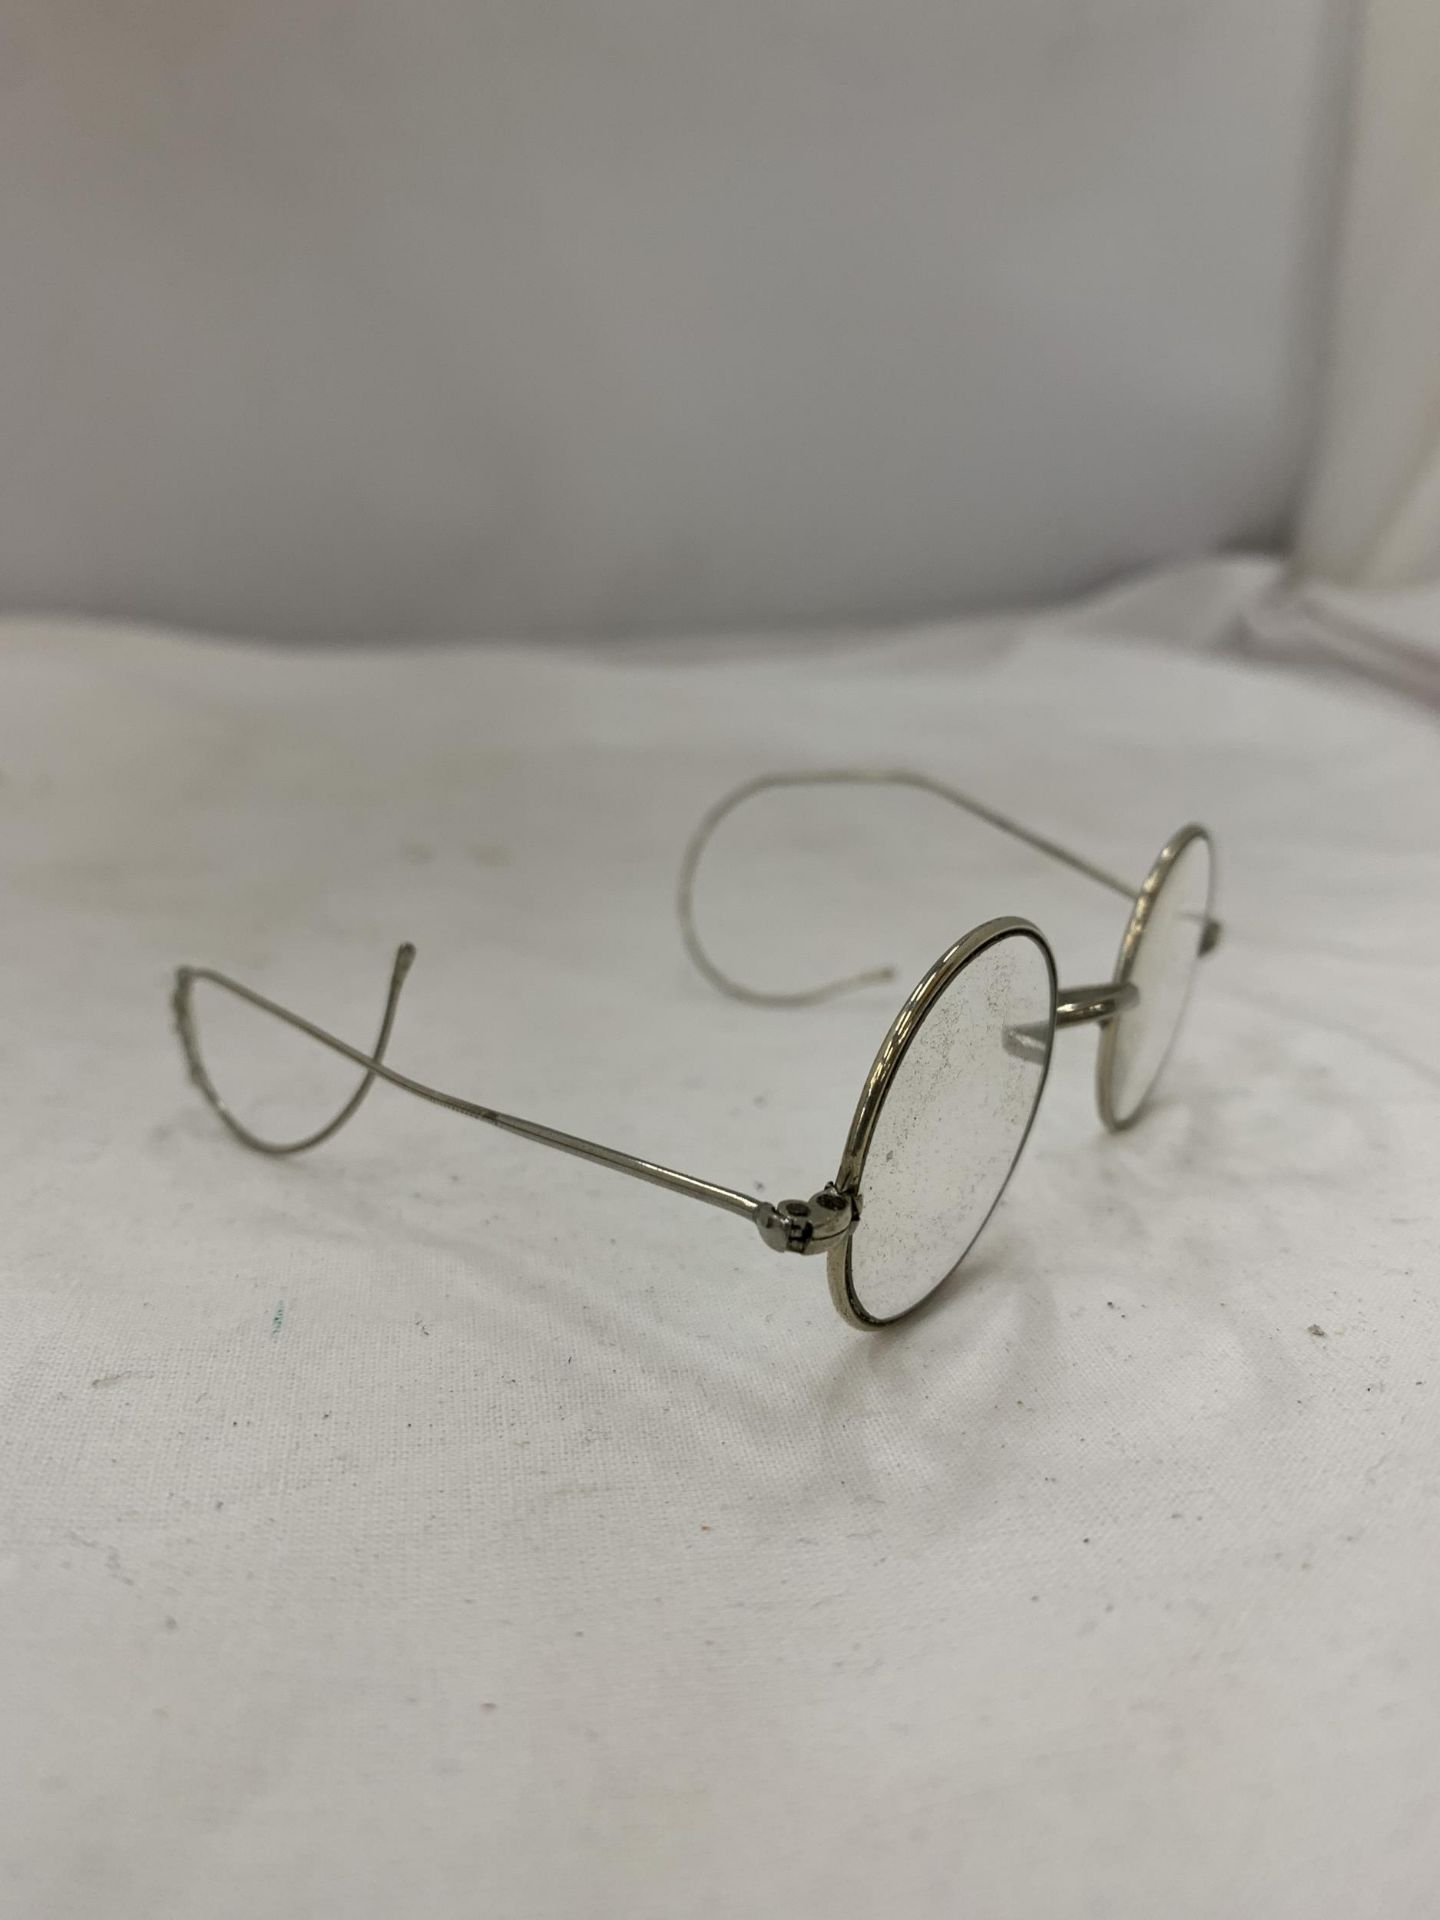 A PAIR OF VICTORIAN SPECTACLES, CASED - Image 3 of 3